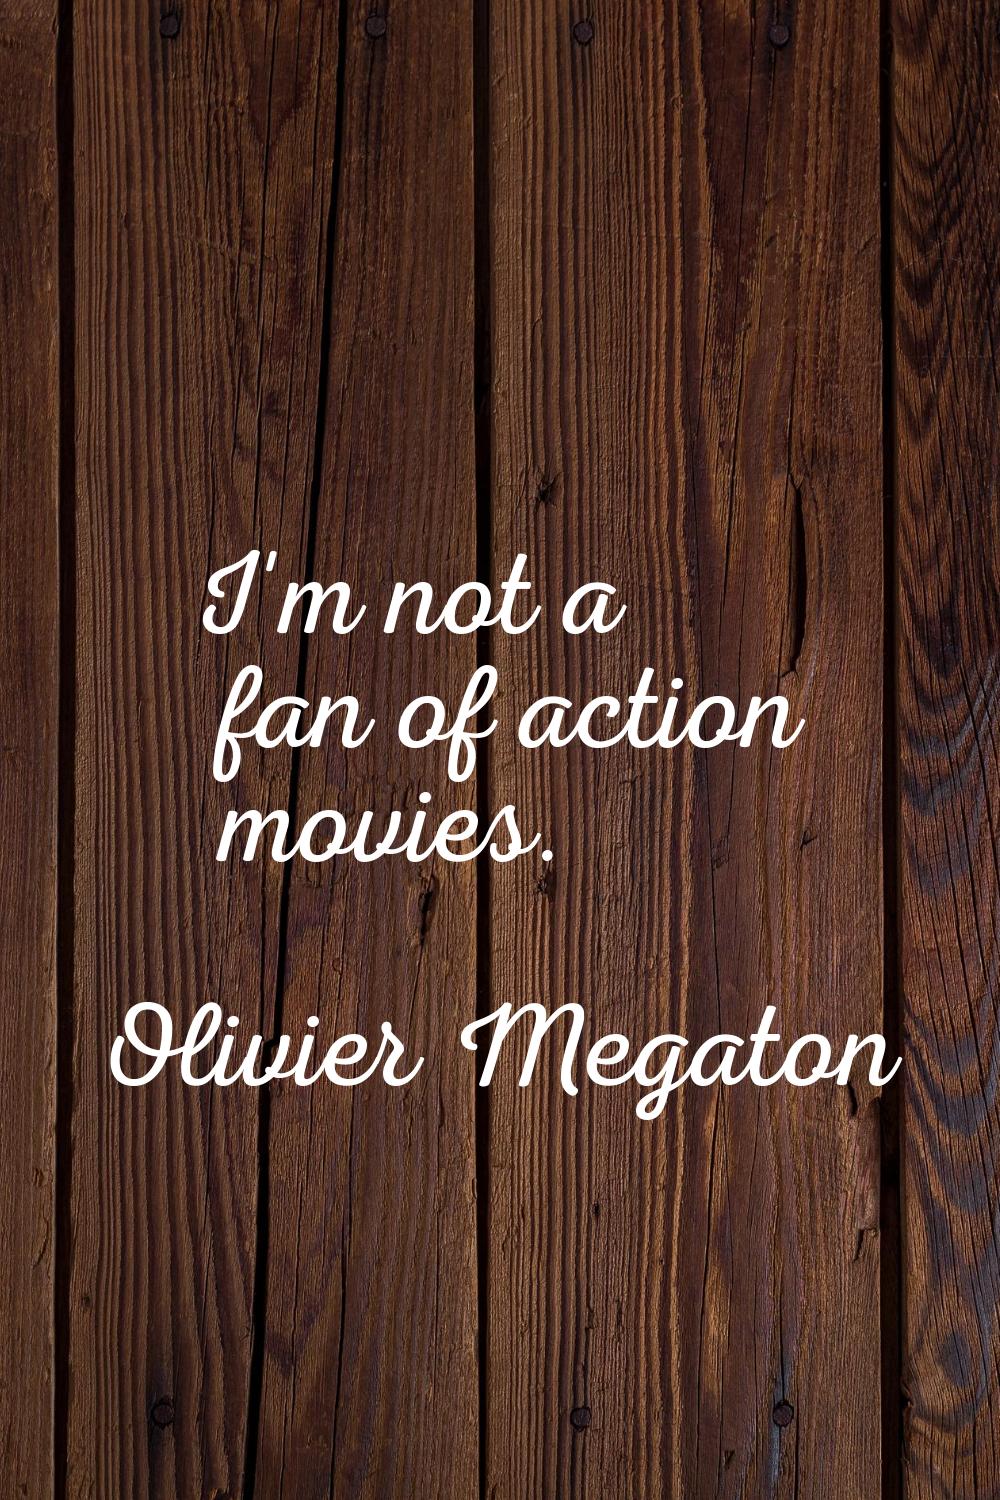 I'm not a fan of action movies.